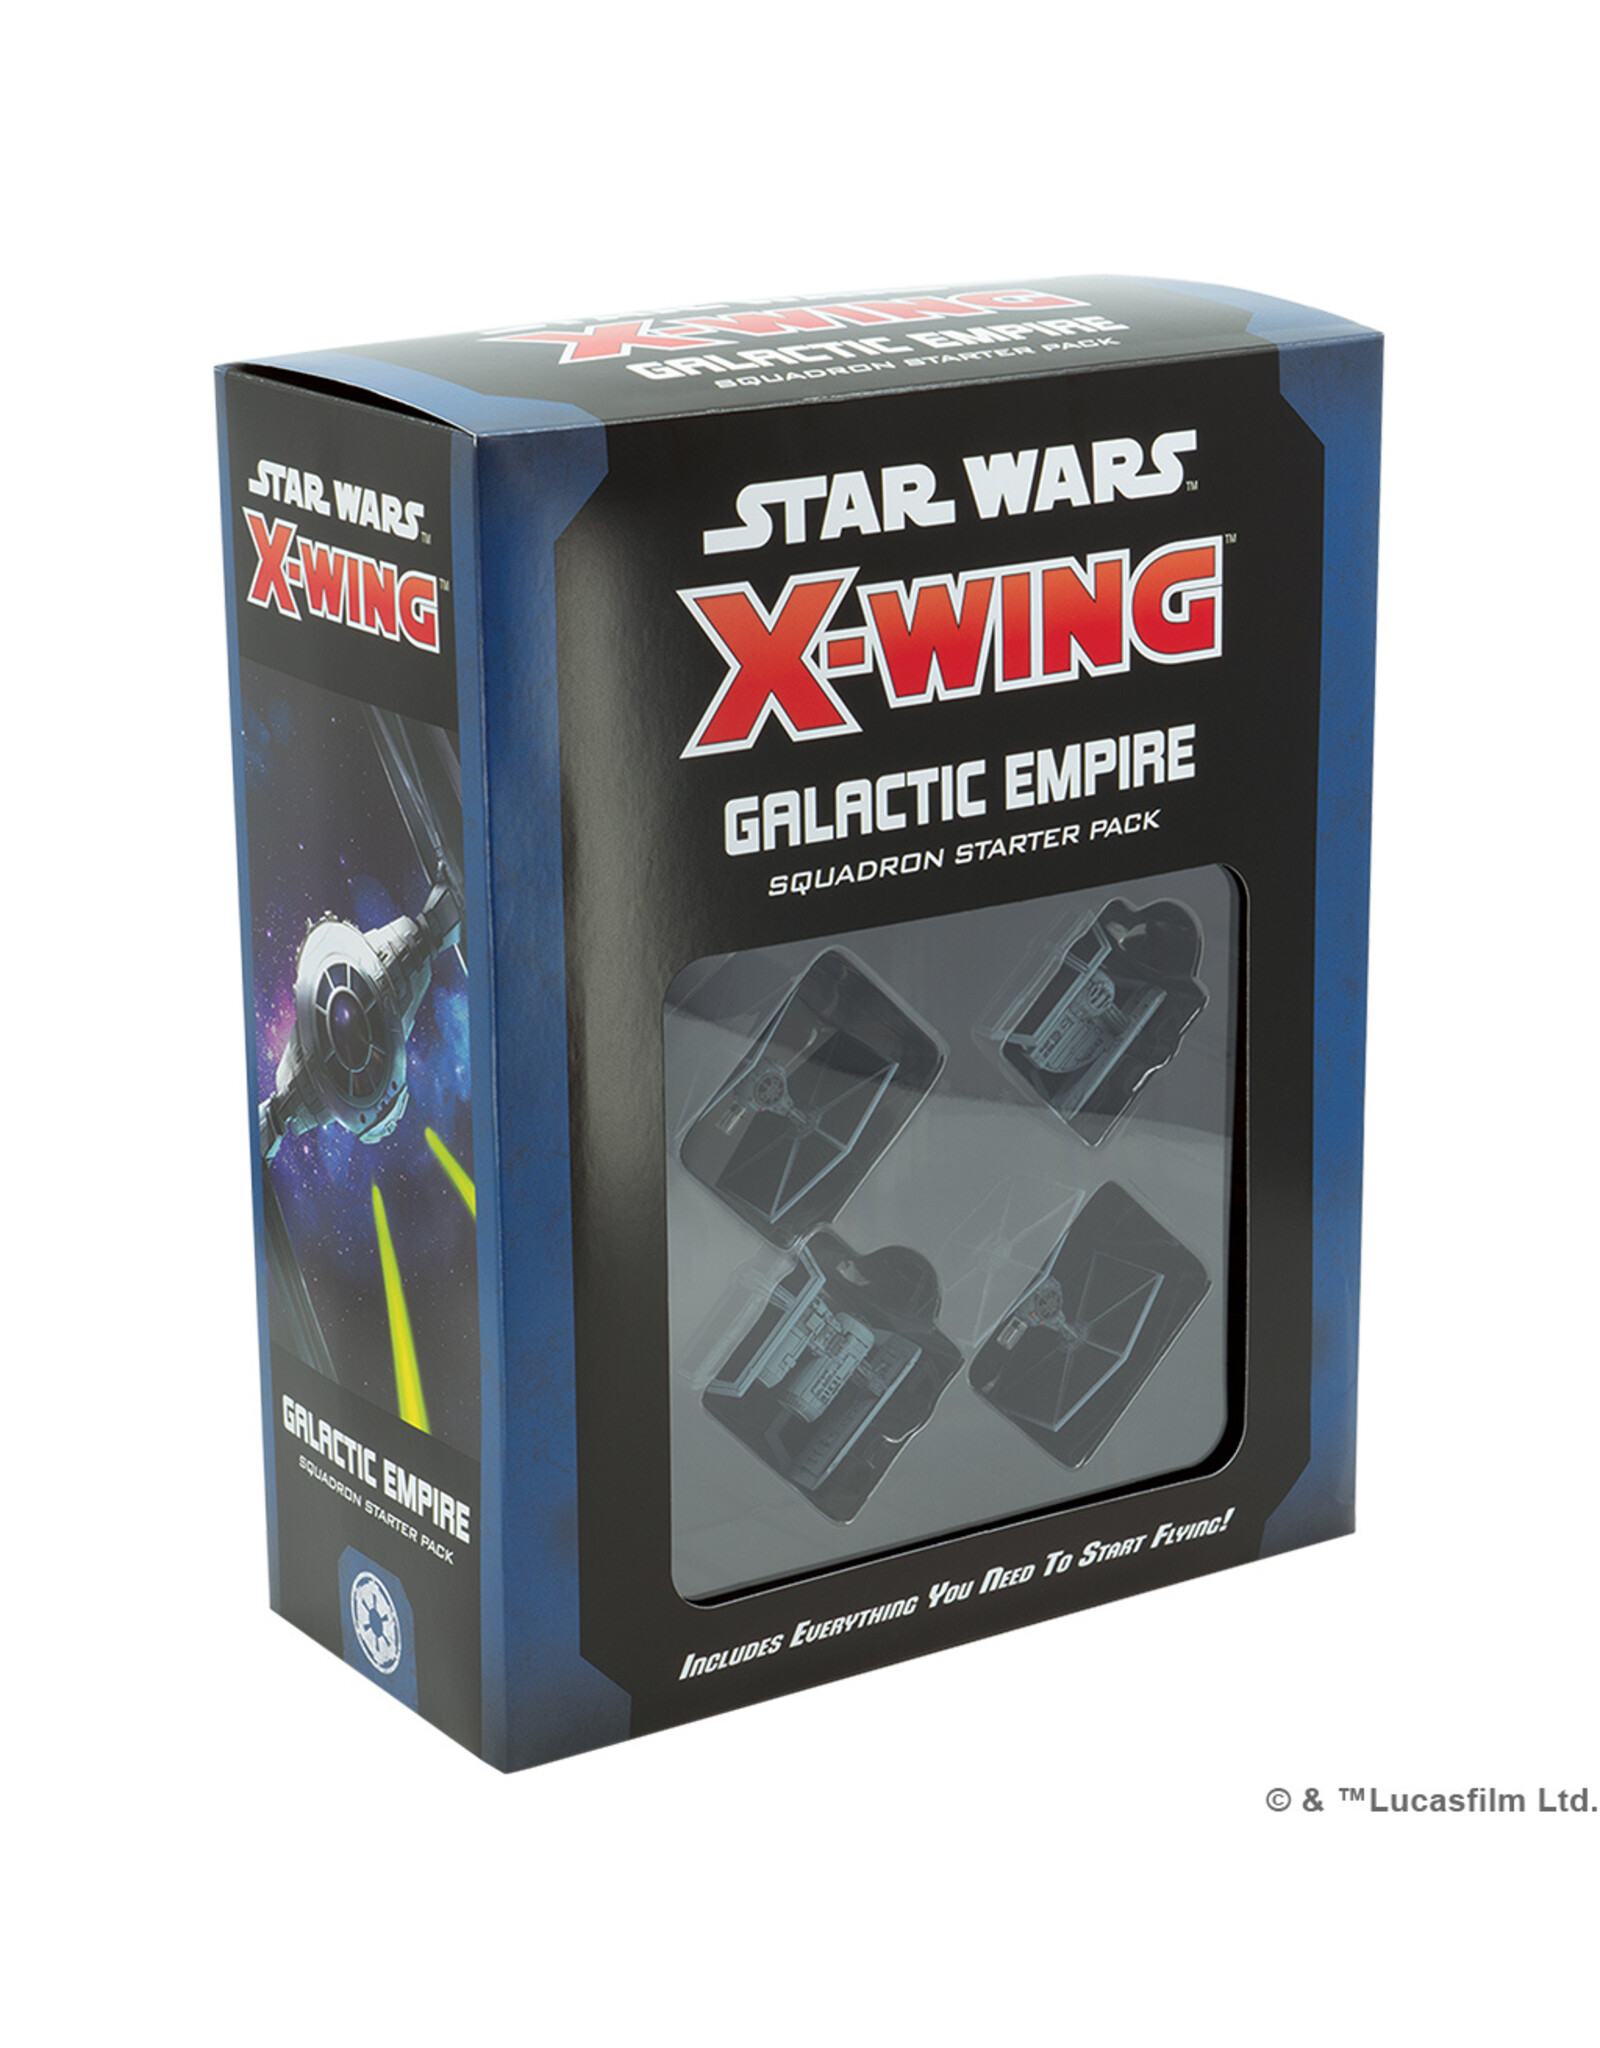 Atomic Mass Games Galactic Empire Squadron Starter Pack